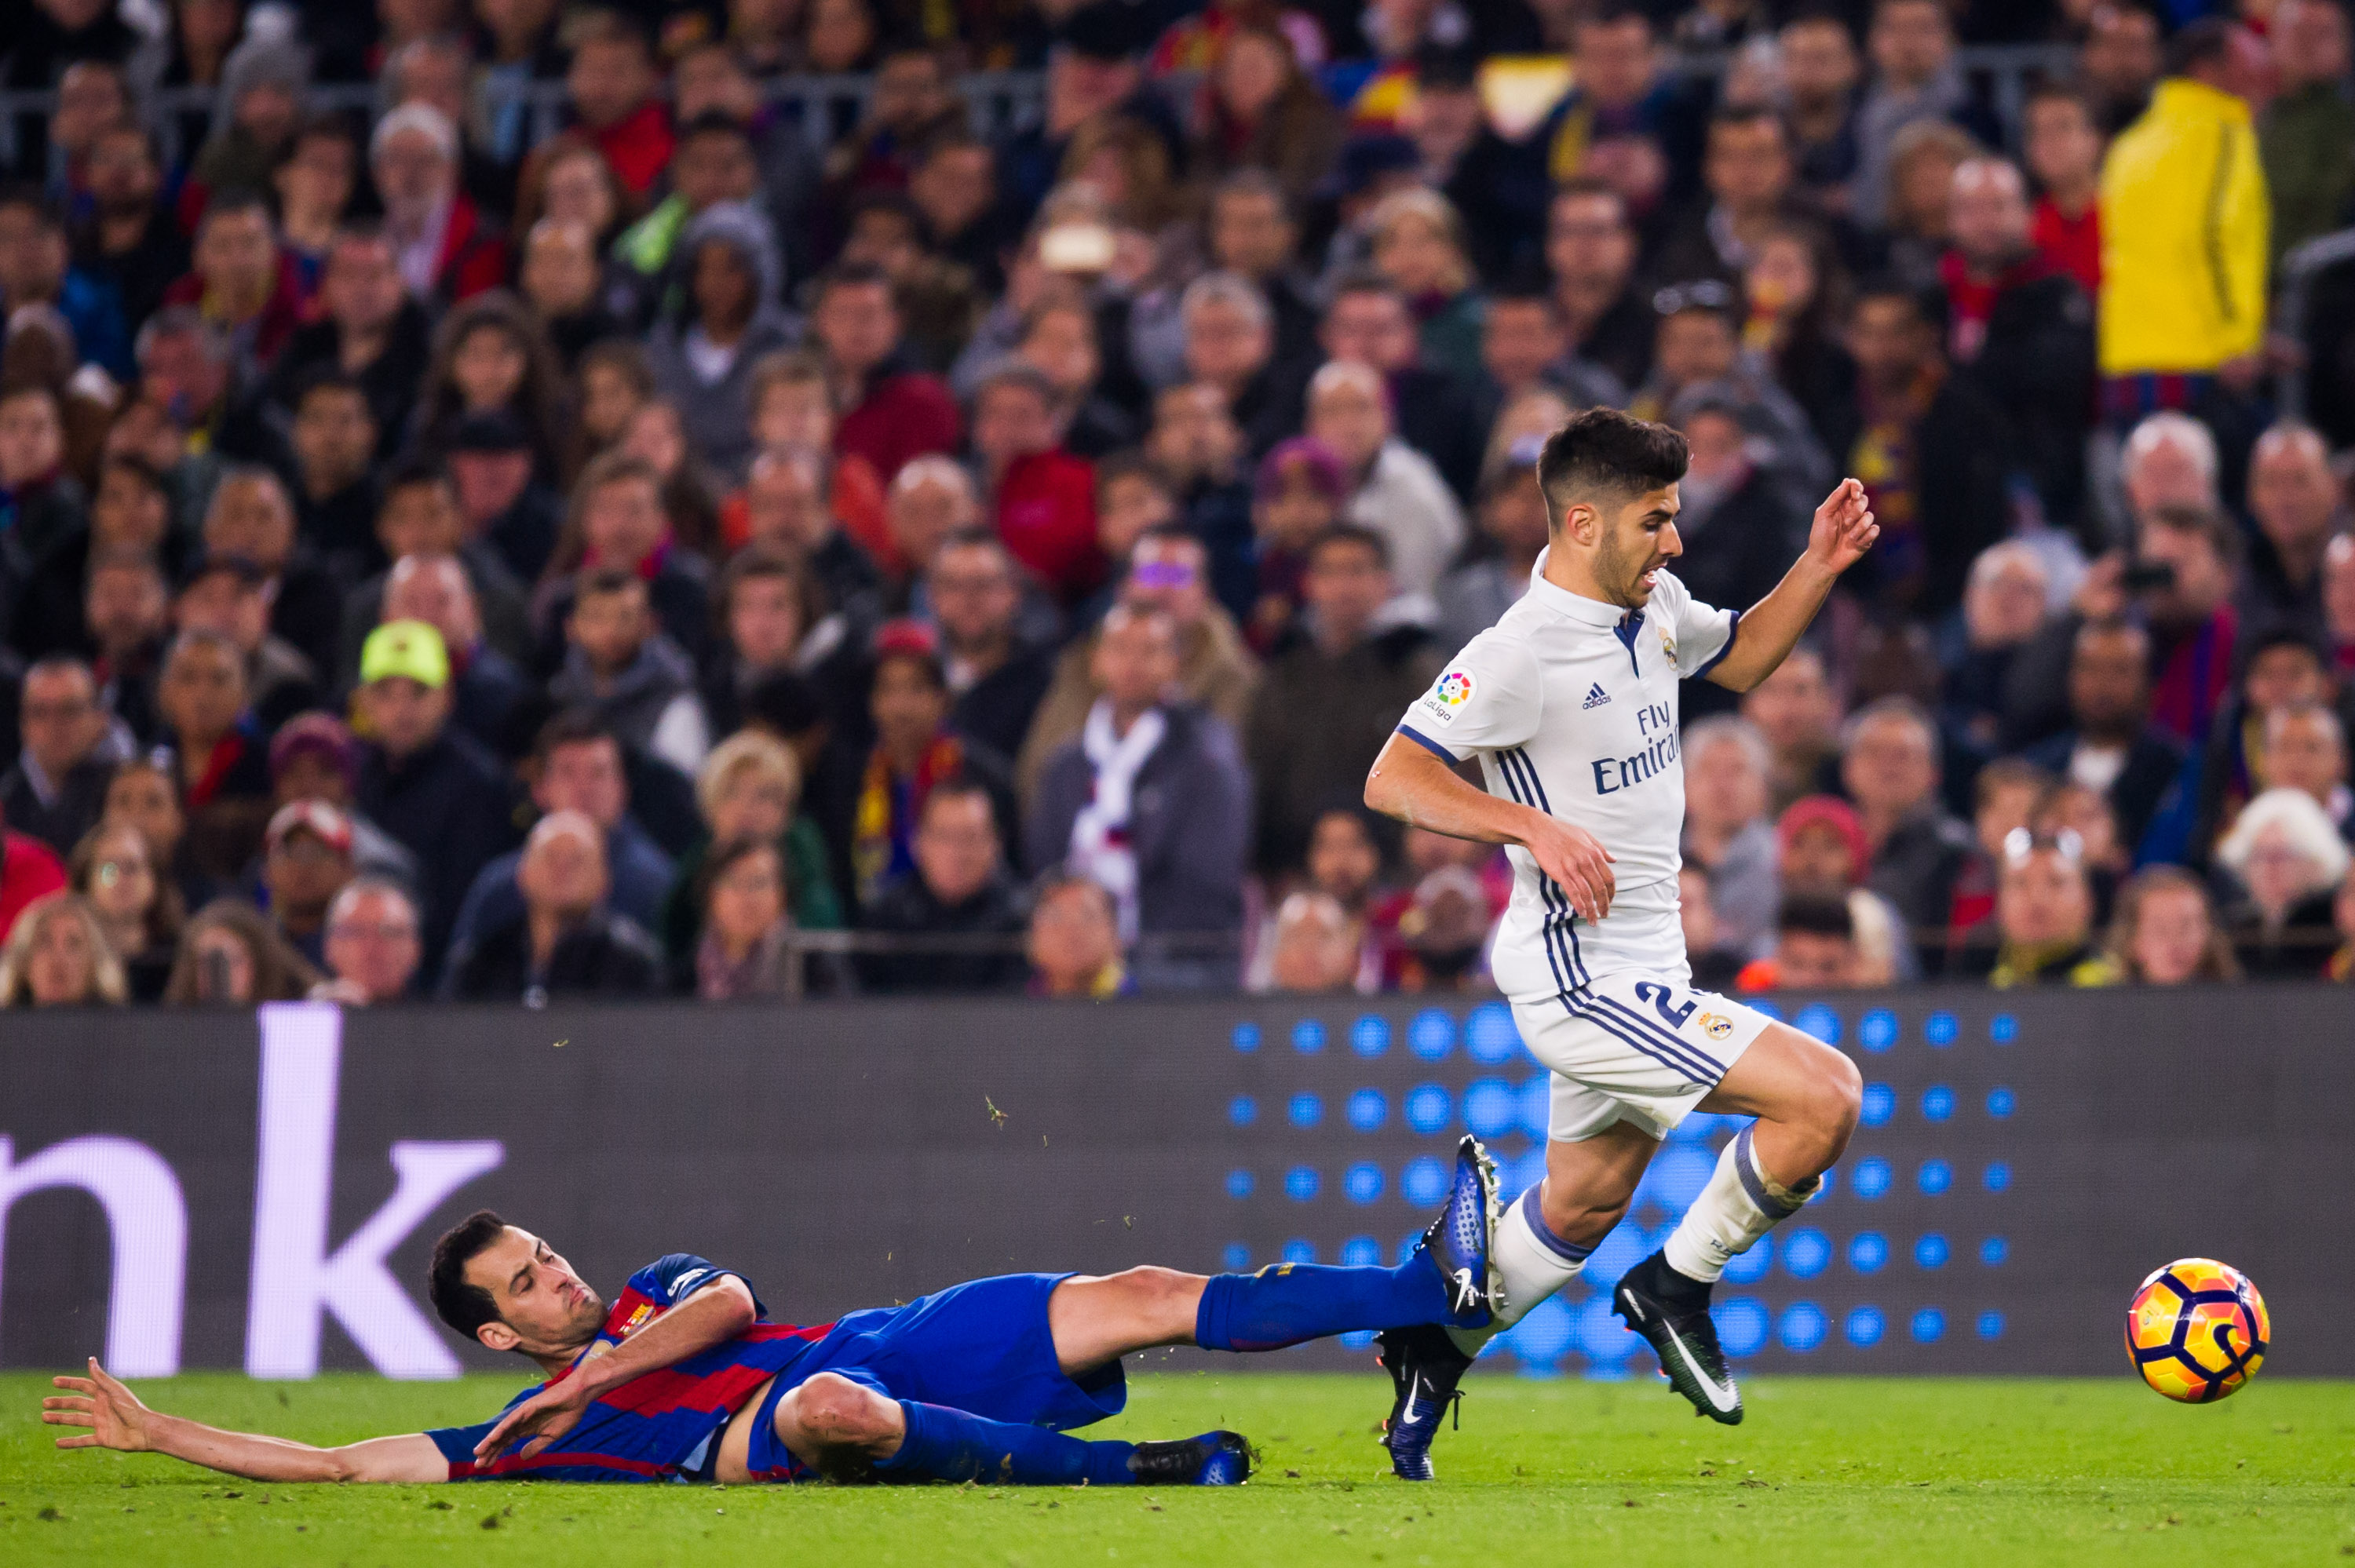 BARCELONA, SPAIN - DECEMBER 03:  Sergio Busquets (L) of FC Barcelona tackles Marco Asensio of Real Madrid CF during the La Liga match between FC Barcelona and Real Madrid CF at Camp Nou stadium on December 3, 2016 in Barcelona, Spain.  (Photo by Alex Caparros/Getty Images)